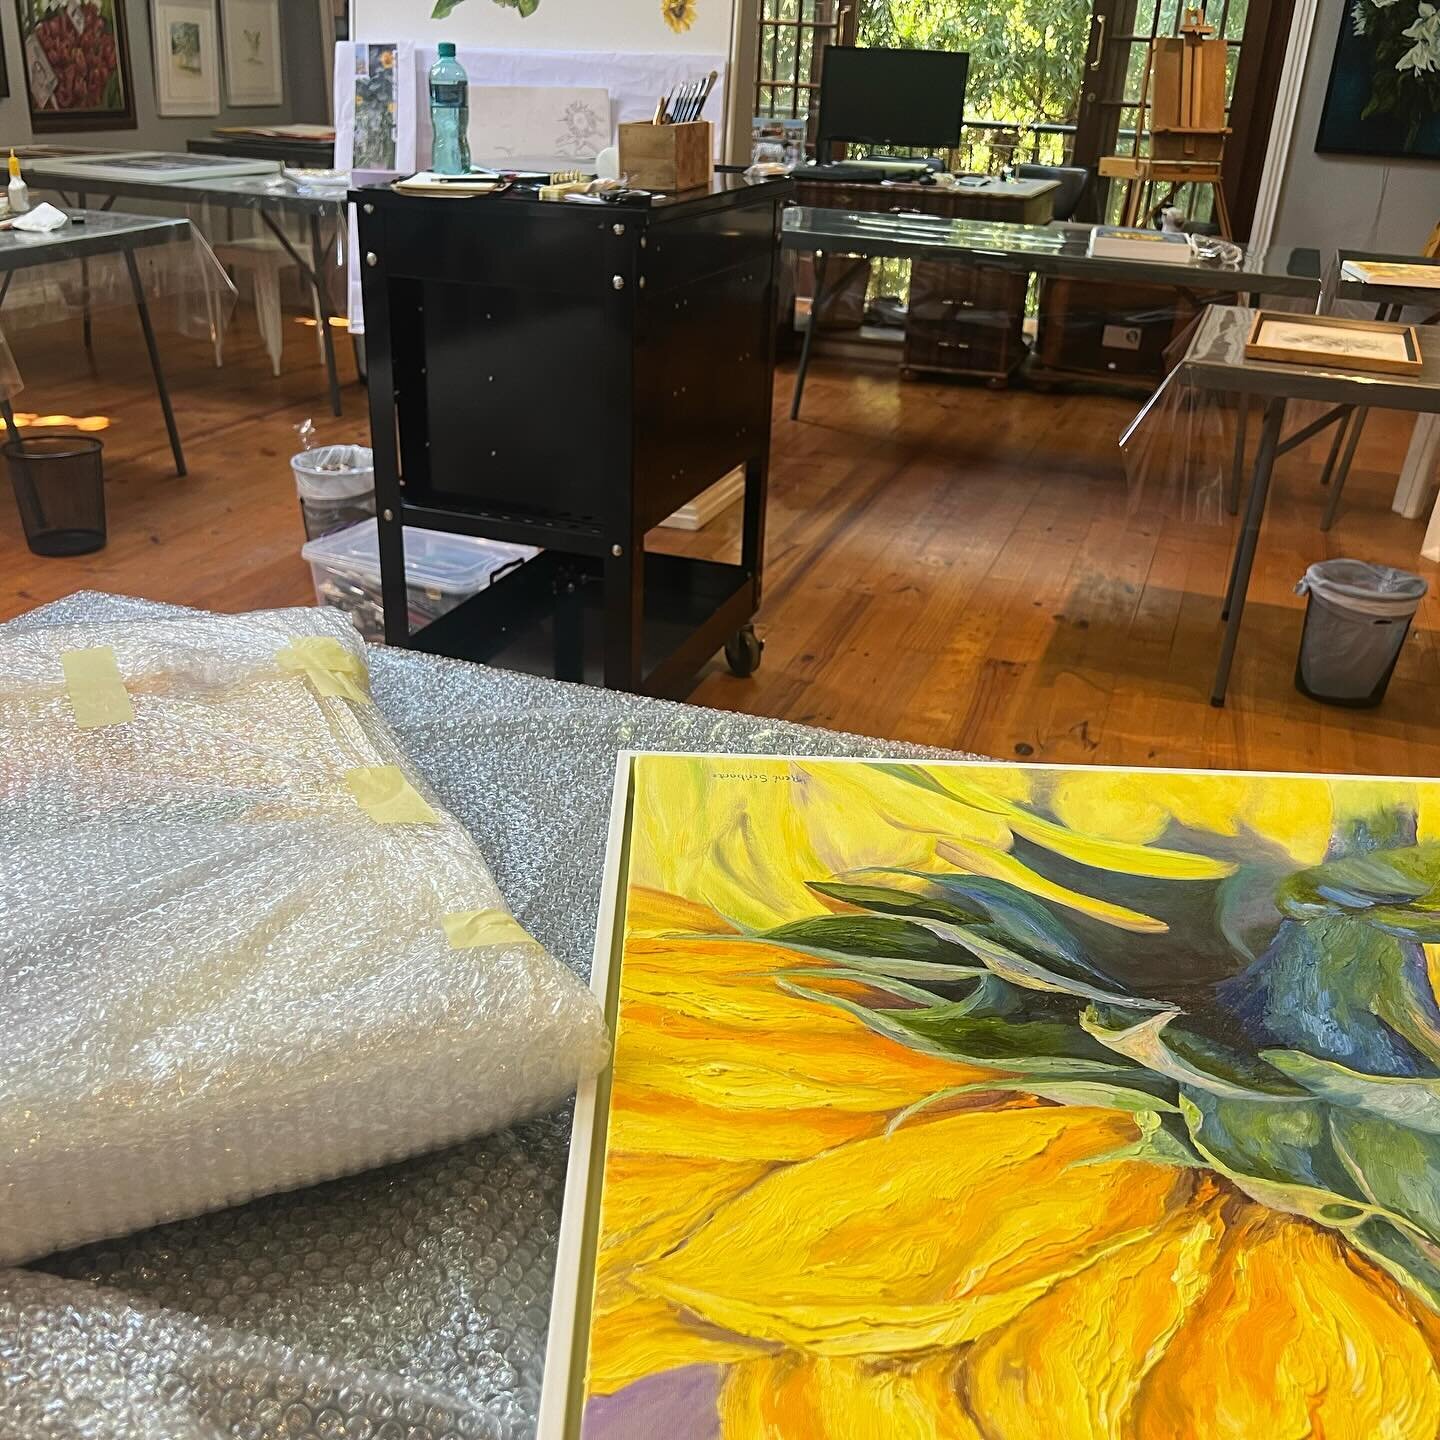 All wrapped and ready for Cape Town🖼️ 

See you there🌻

#renescribante #renescribanteloftstudio #renescribanteartist
#artexhibitionscapetown #firstthursdayscapetown #artloevers #artforsale #6spinstreetrestaurantgallery